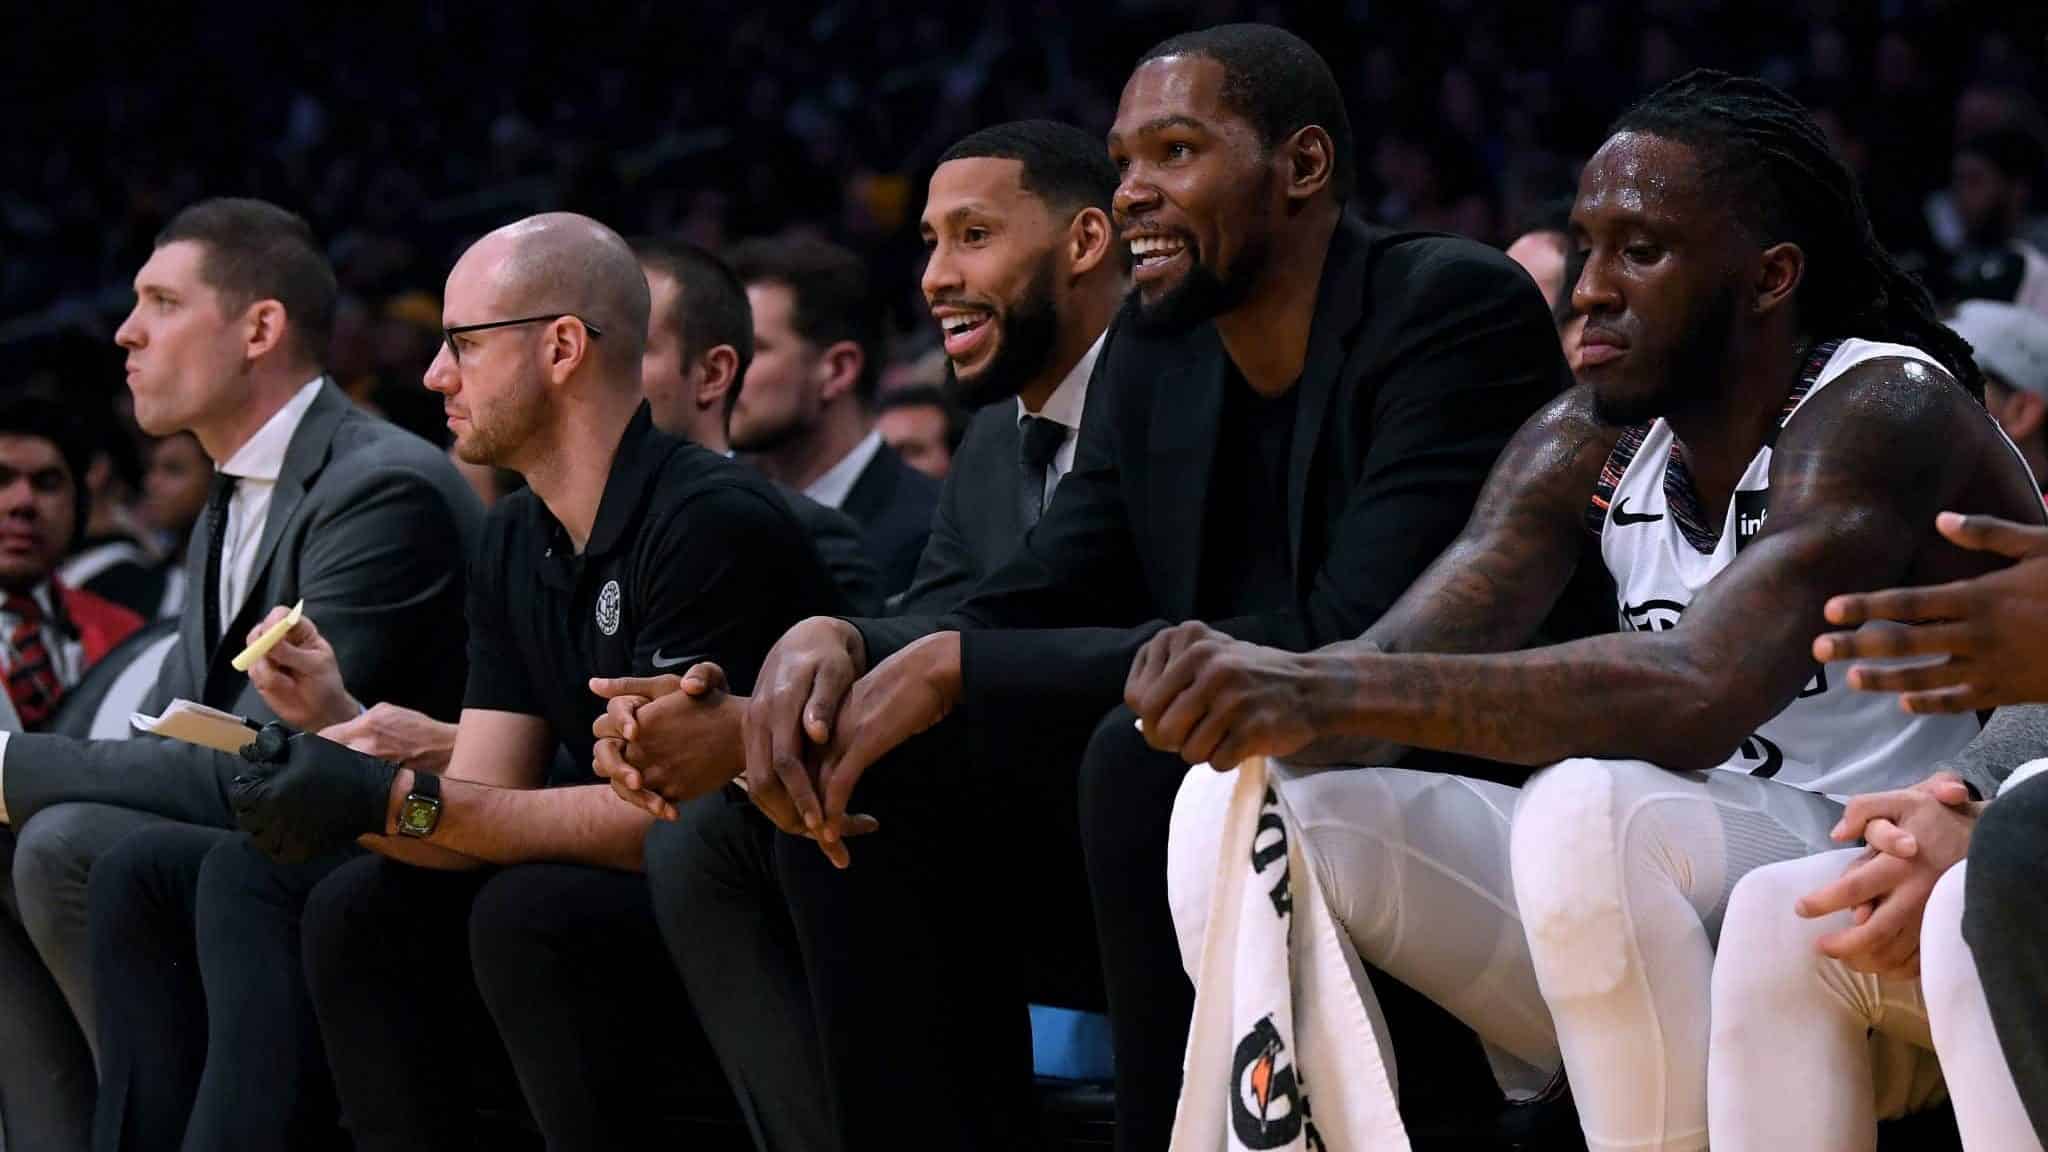 LOS ANGELES, CALIFORNIA - MARCH 10: Kevin Durant #7 of the Brooklyn Nets smiles during the first half against the Los Angeles Lakers at Staples Center on March 10, 2020 in Los Angeles, California.